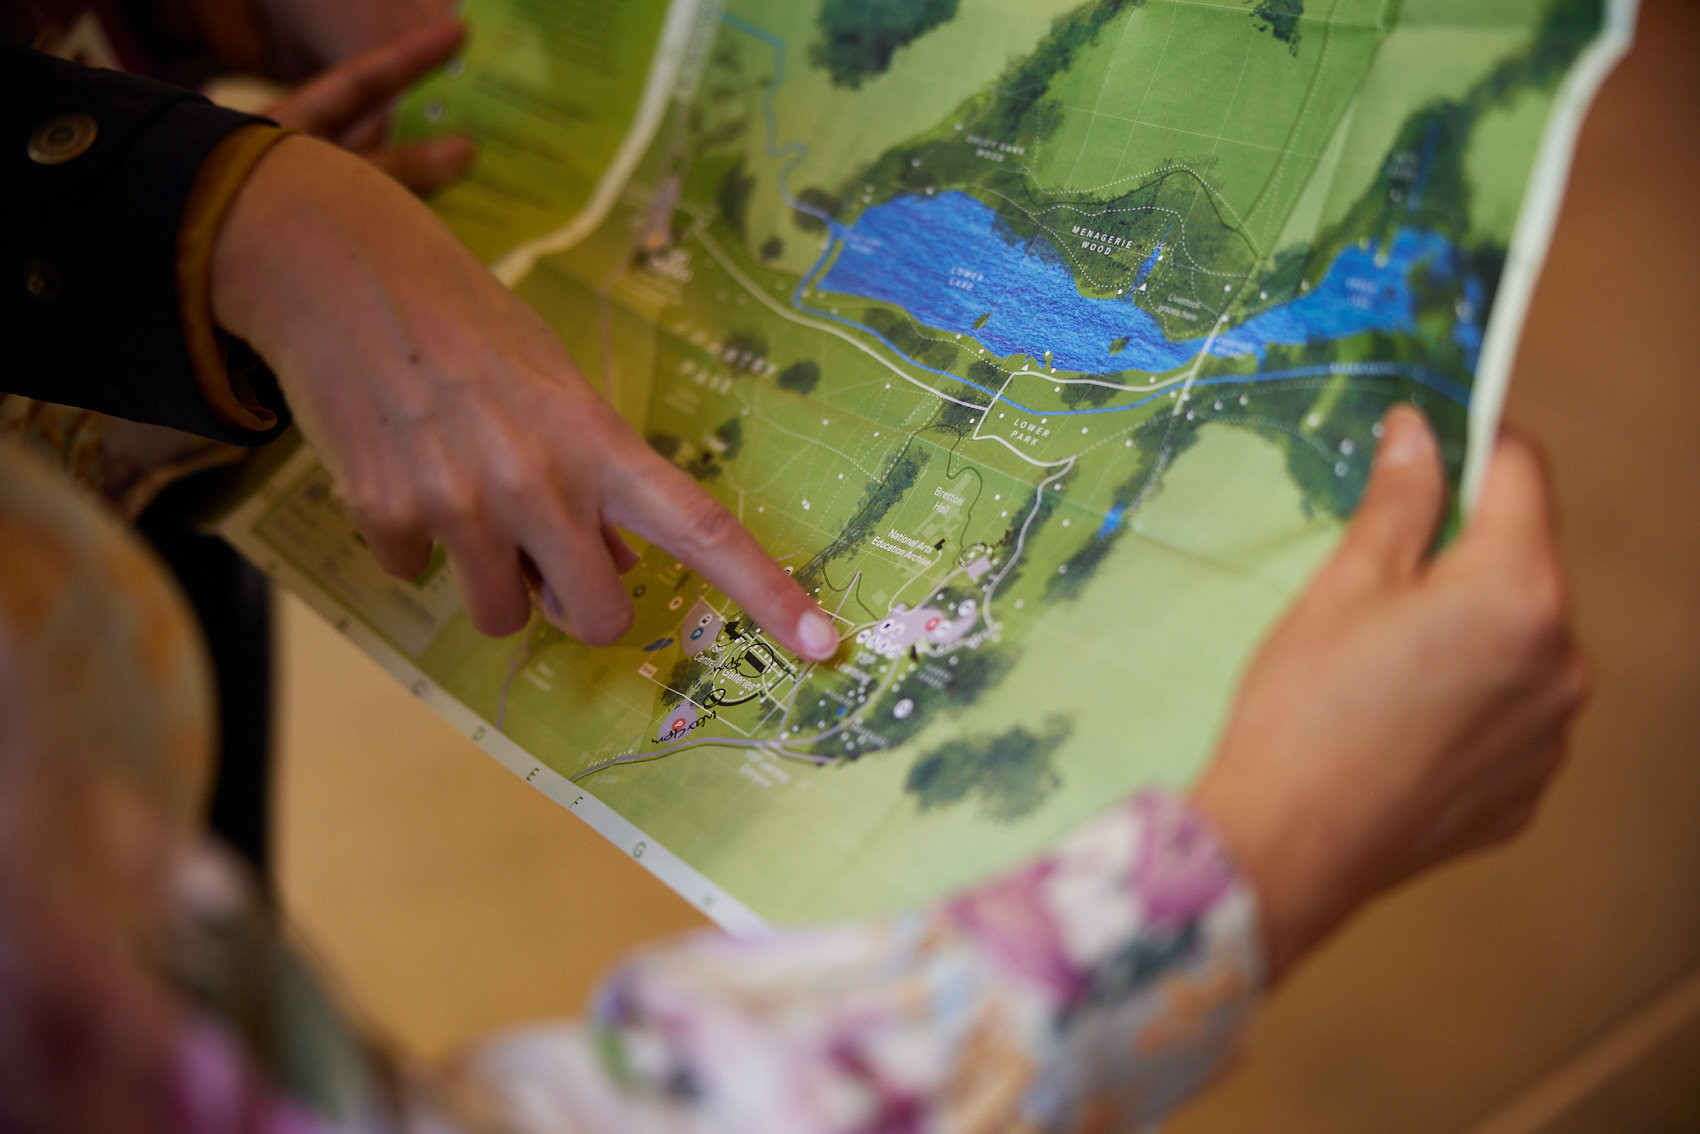 Close up of hands pointing to areas on a YSP Park map